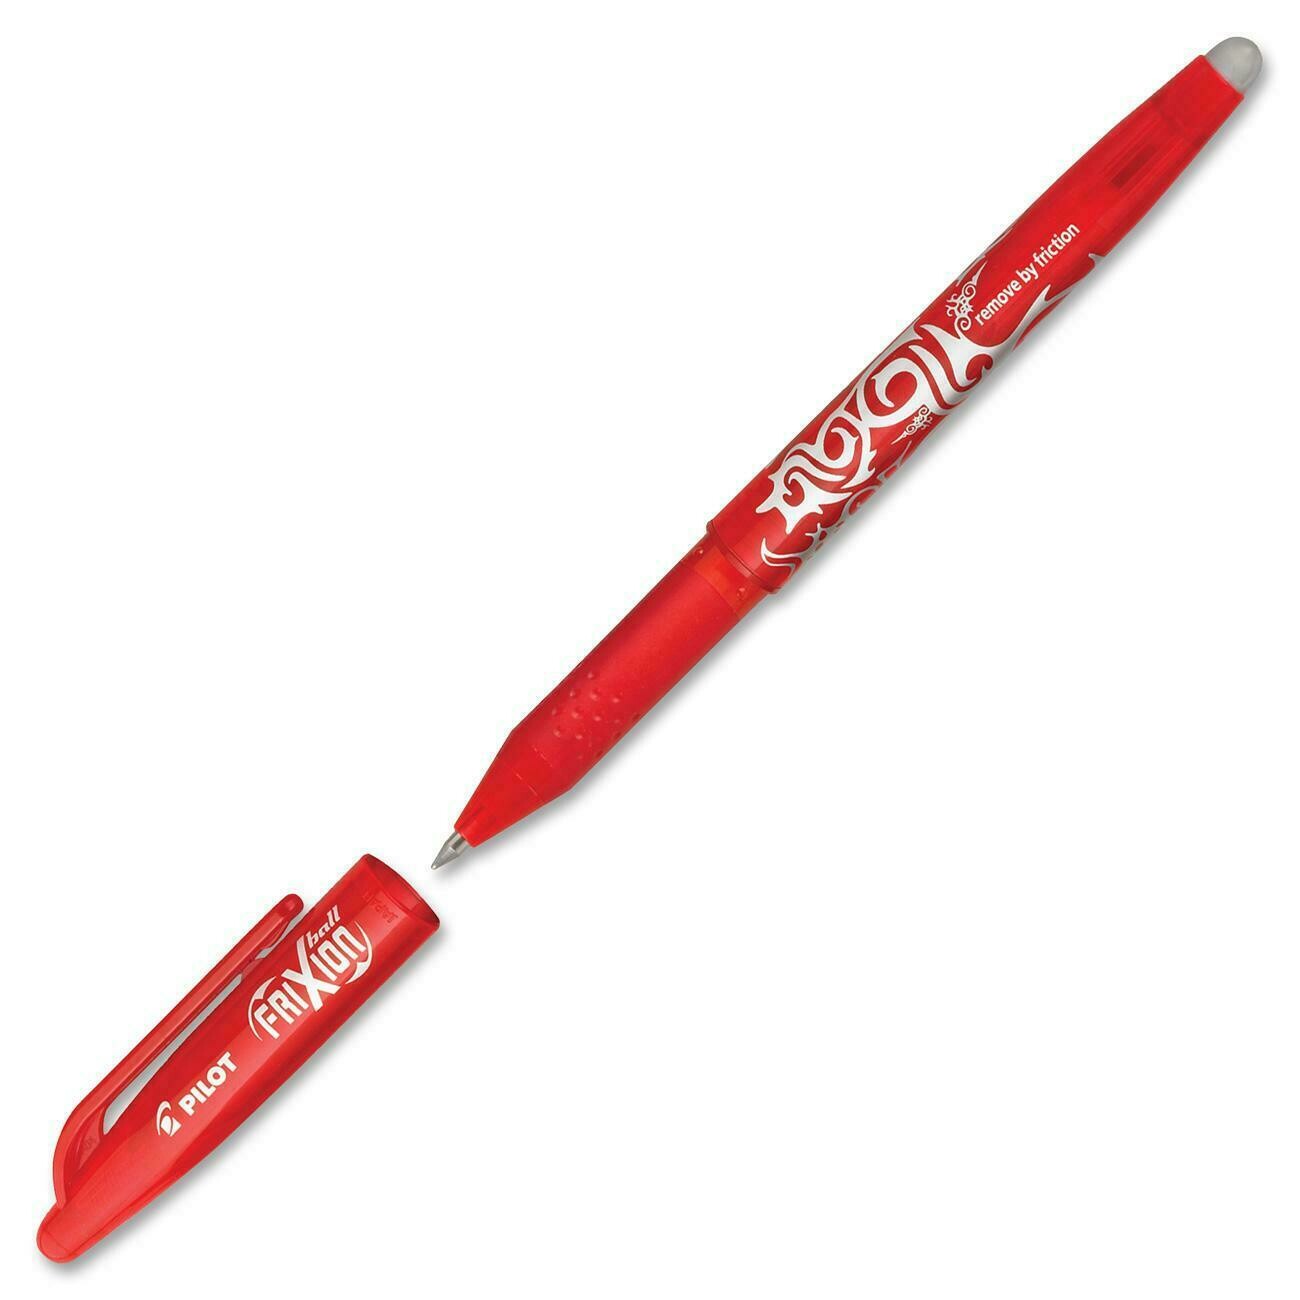 Pen, Erasable, Gel Rollerball, FriXion Red, Single, 0.7 Mm, Refillable